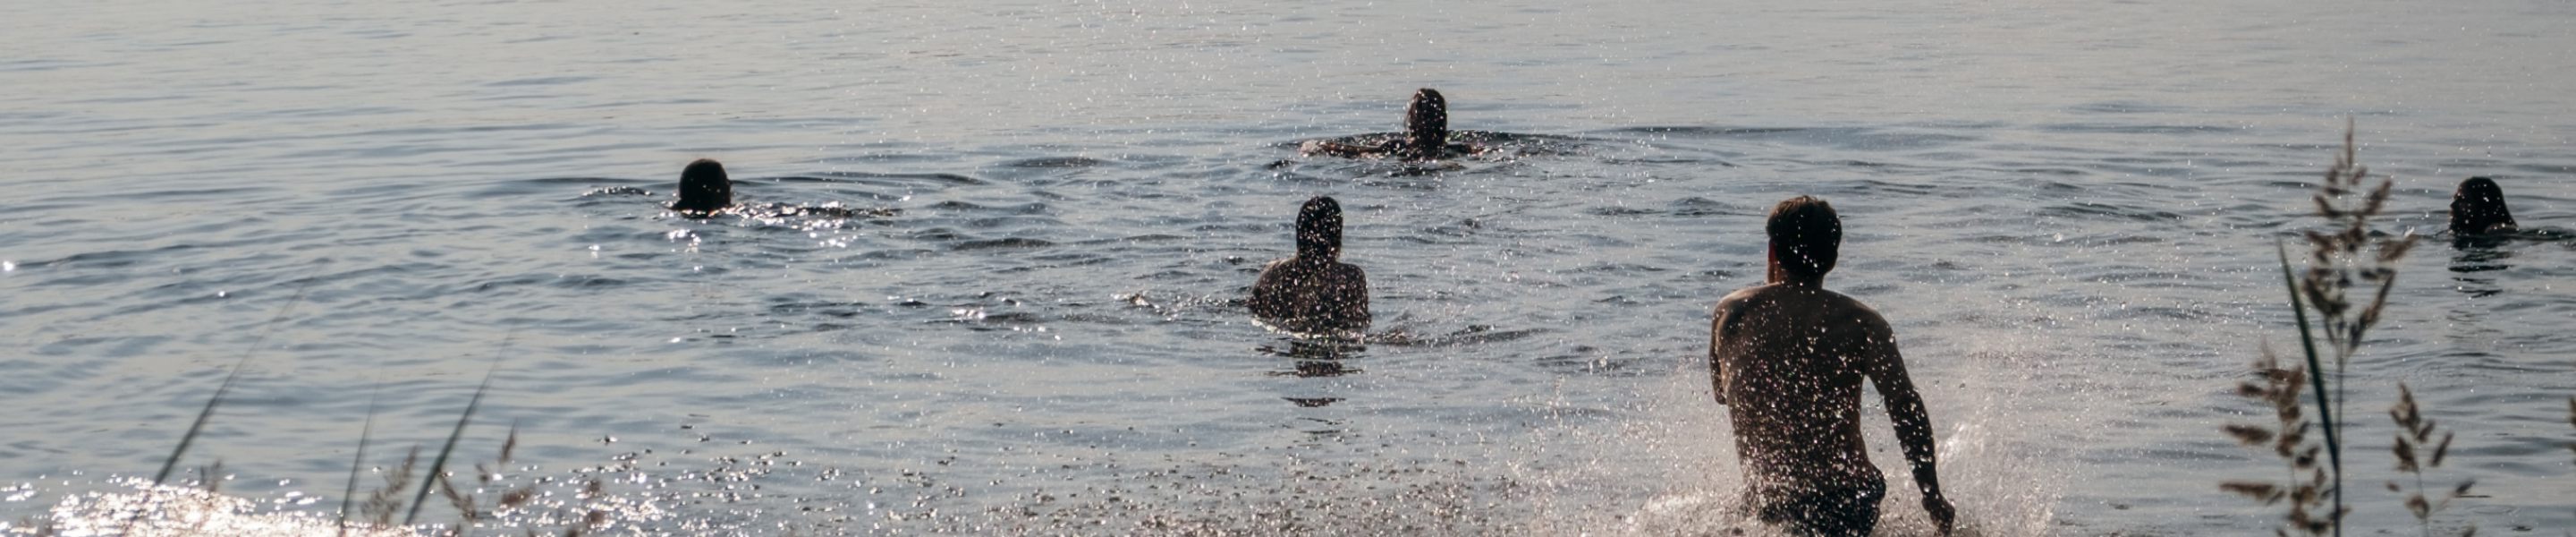 A group of people in cold water